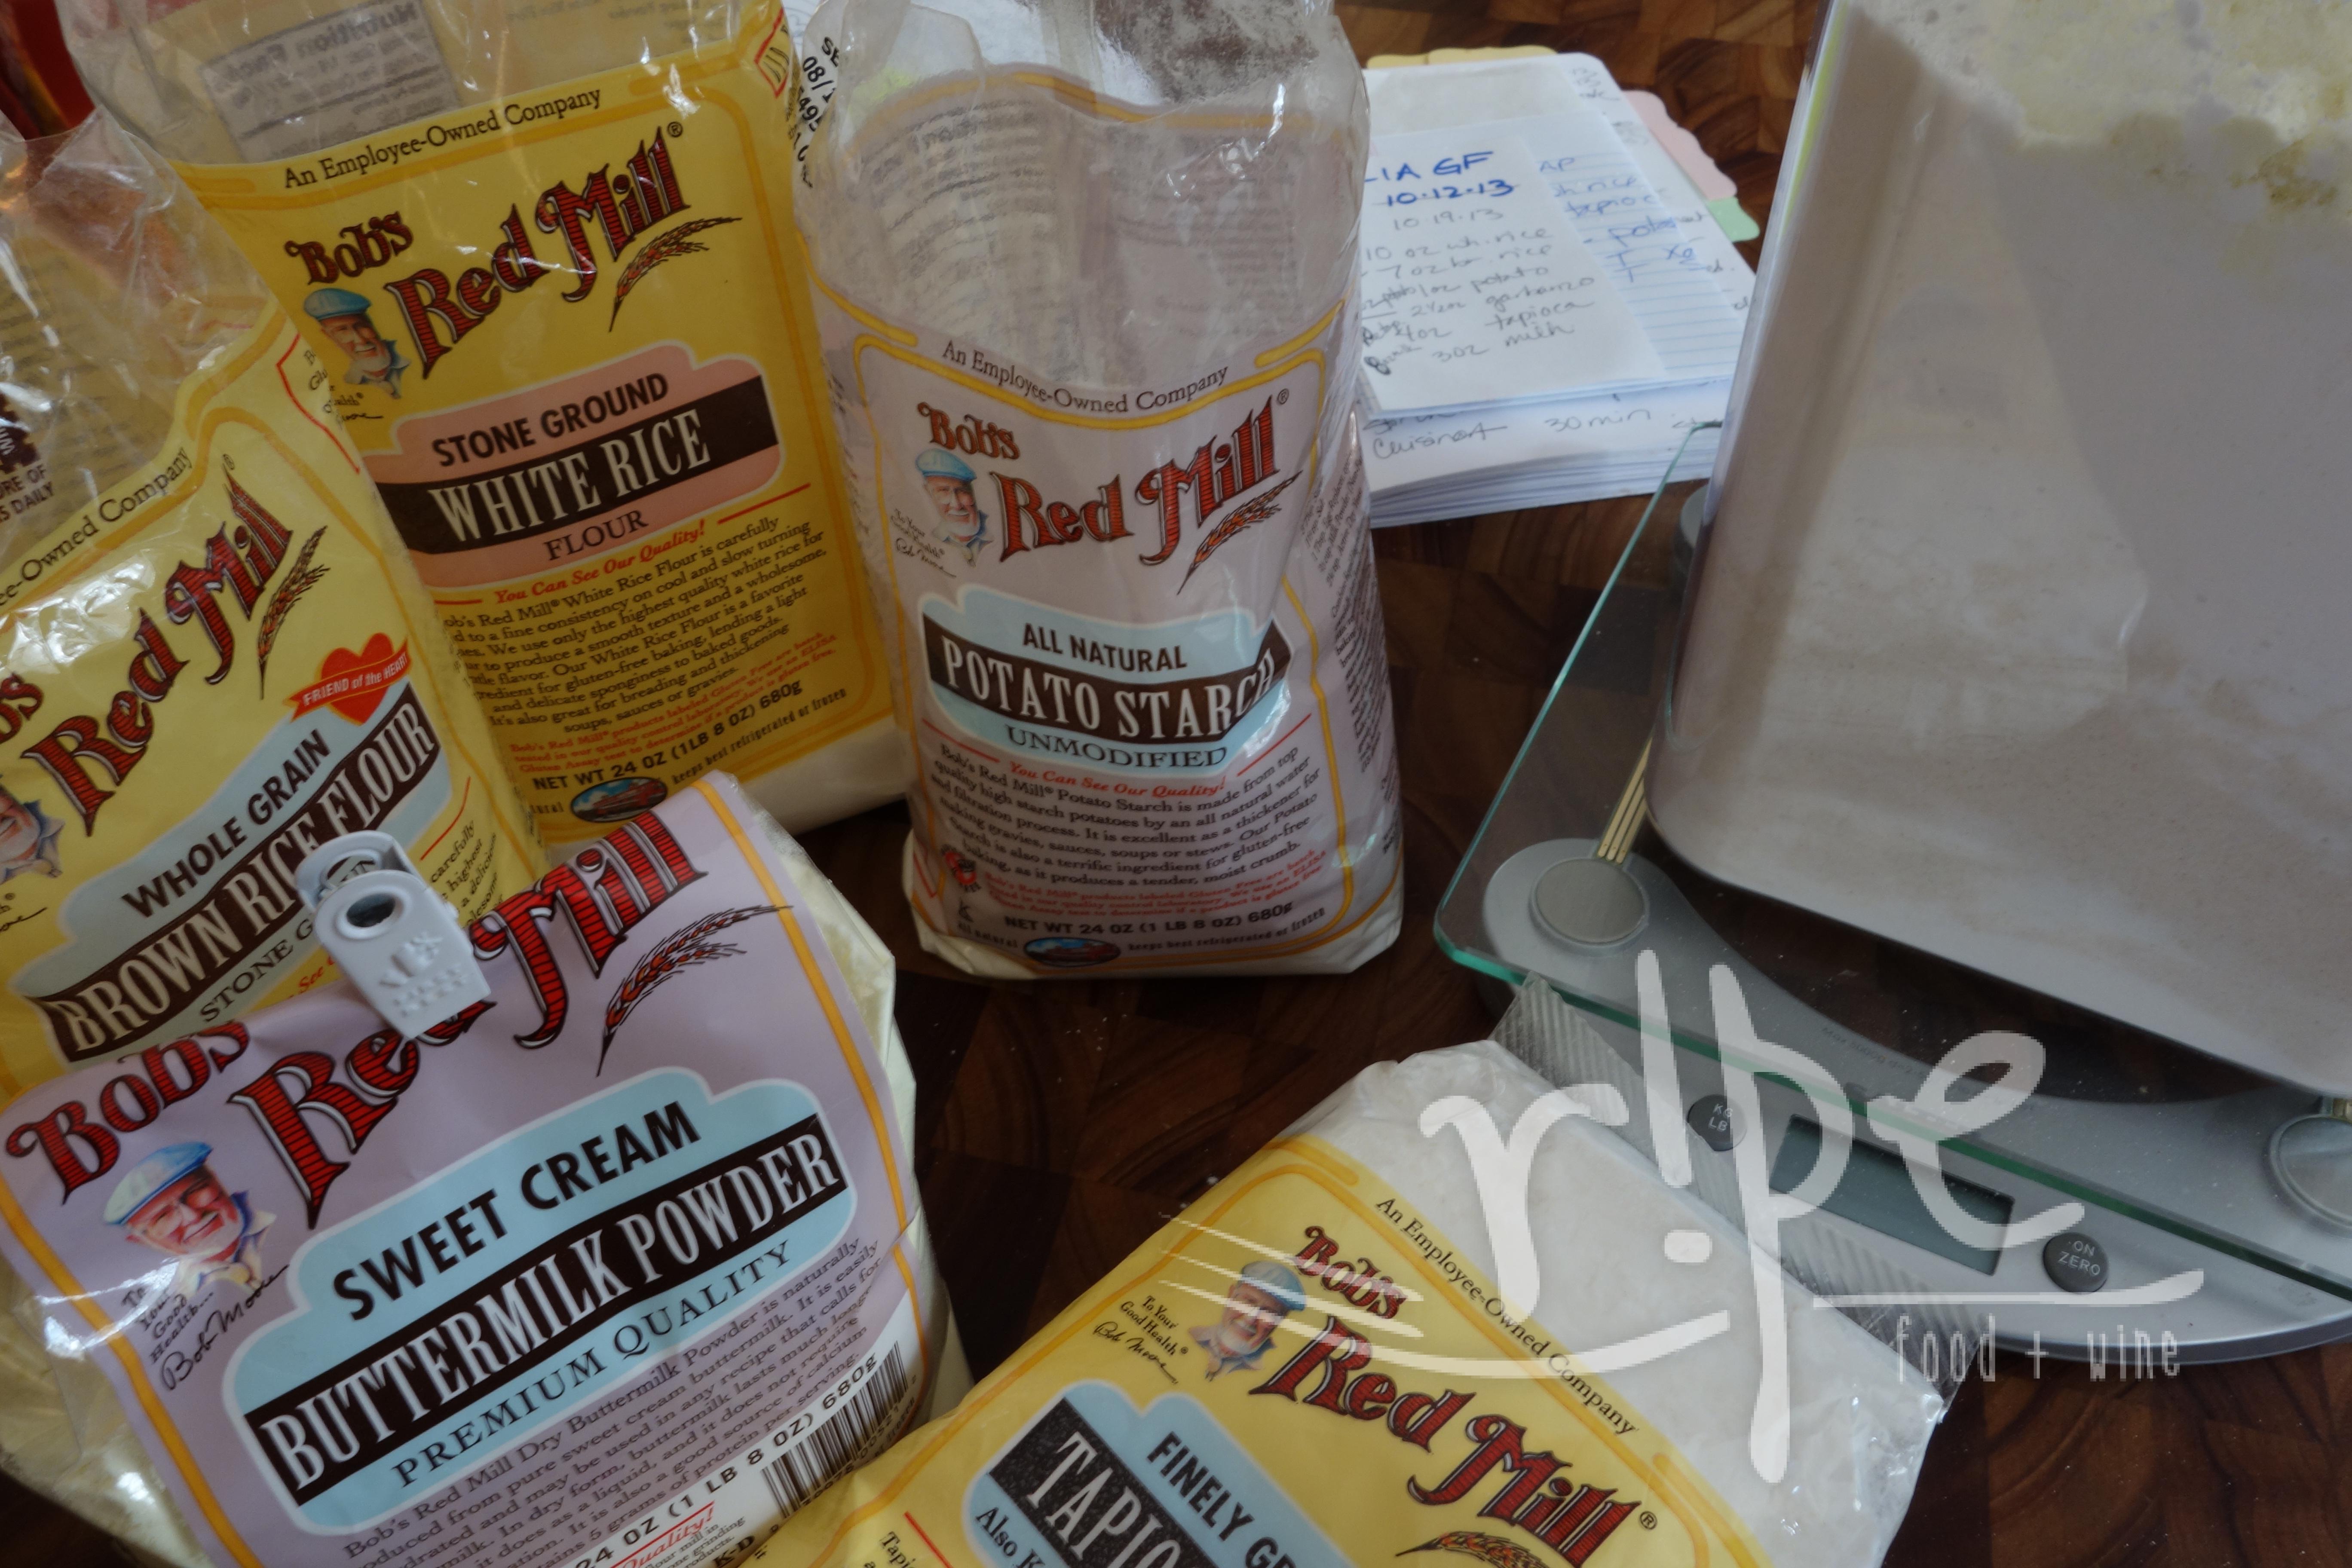 Amy’s Gluten-Free “All-Purpose” Flour Mix (Cup4Cup knock off)